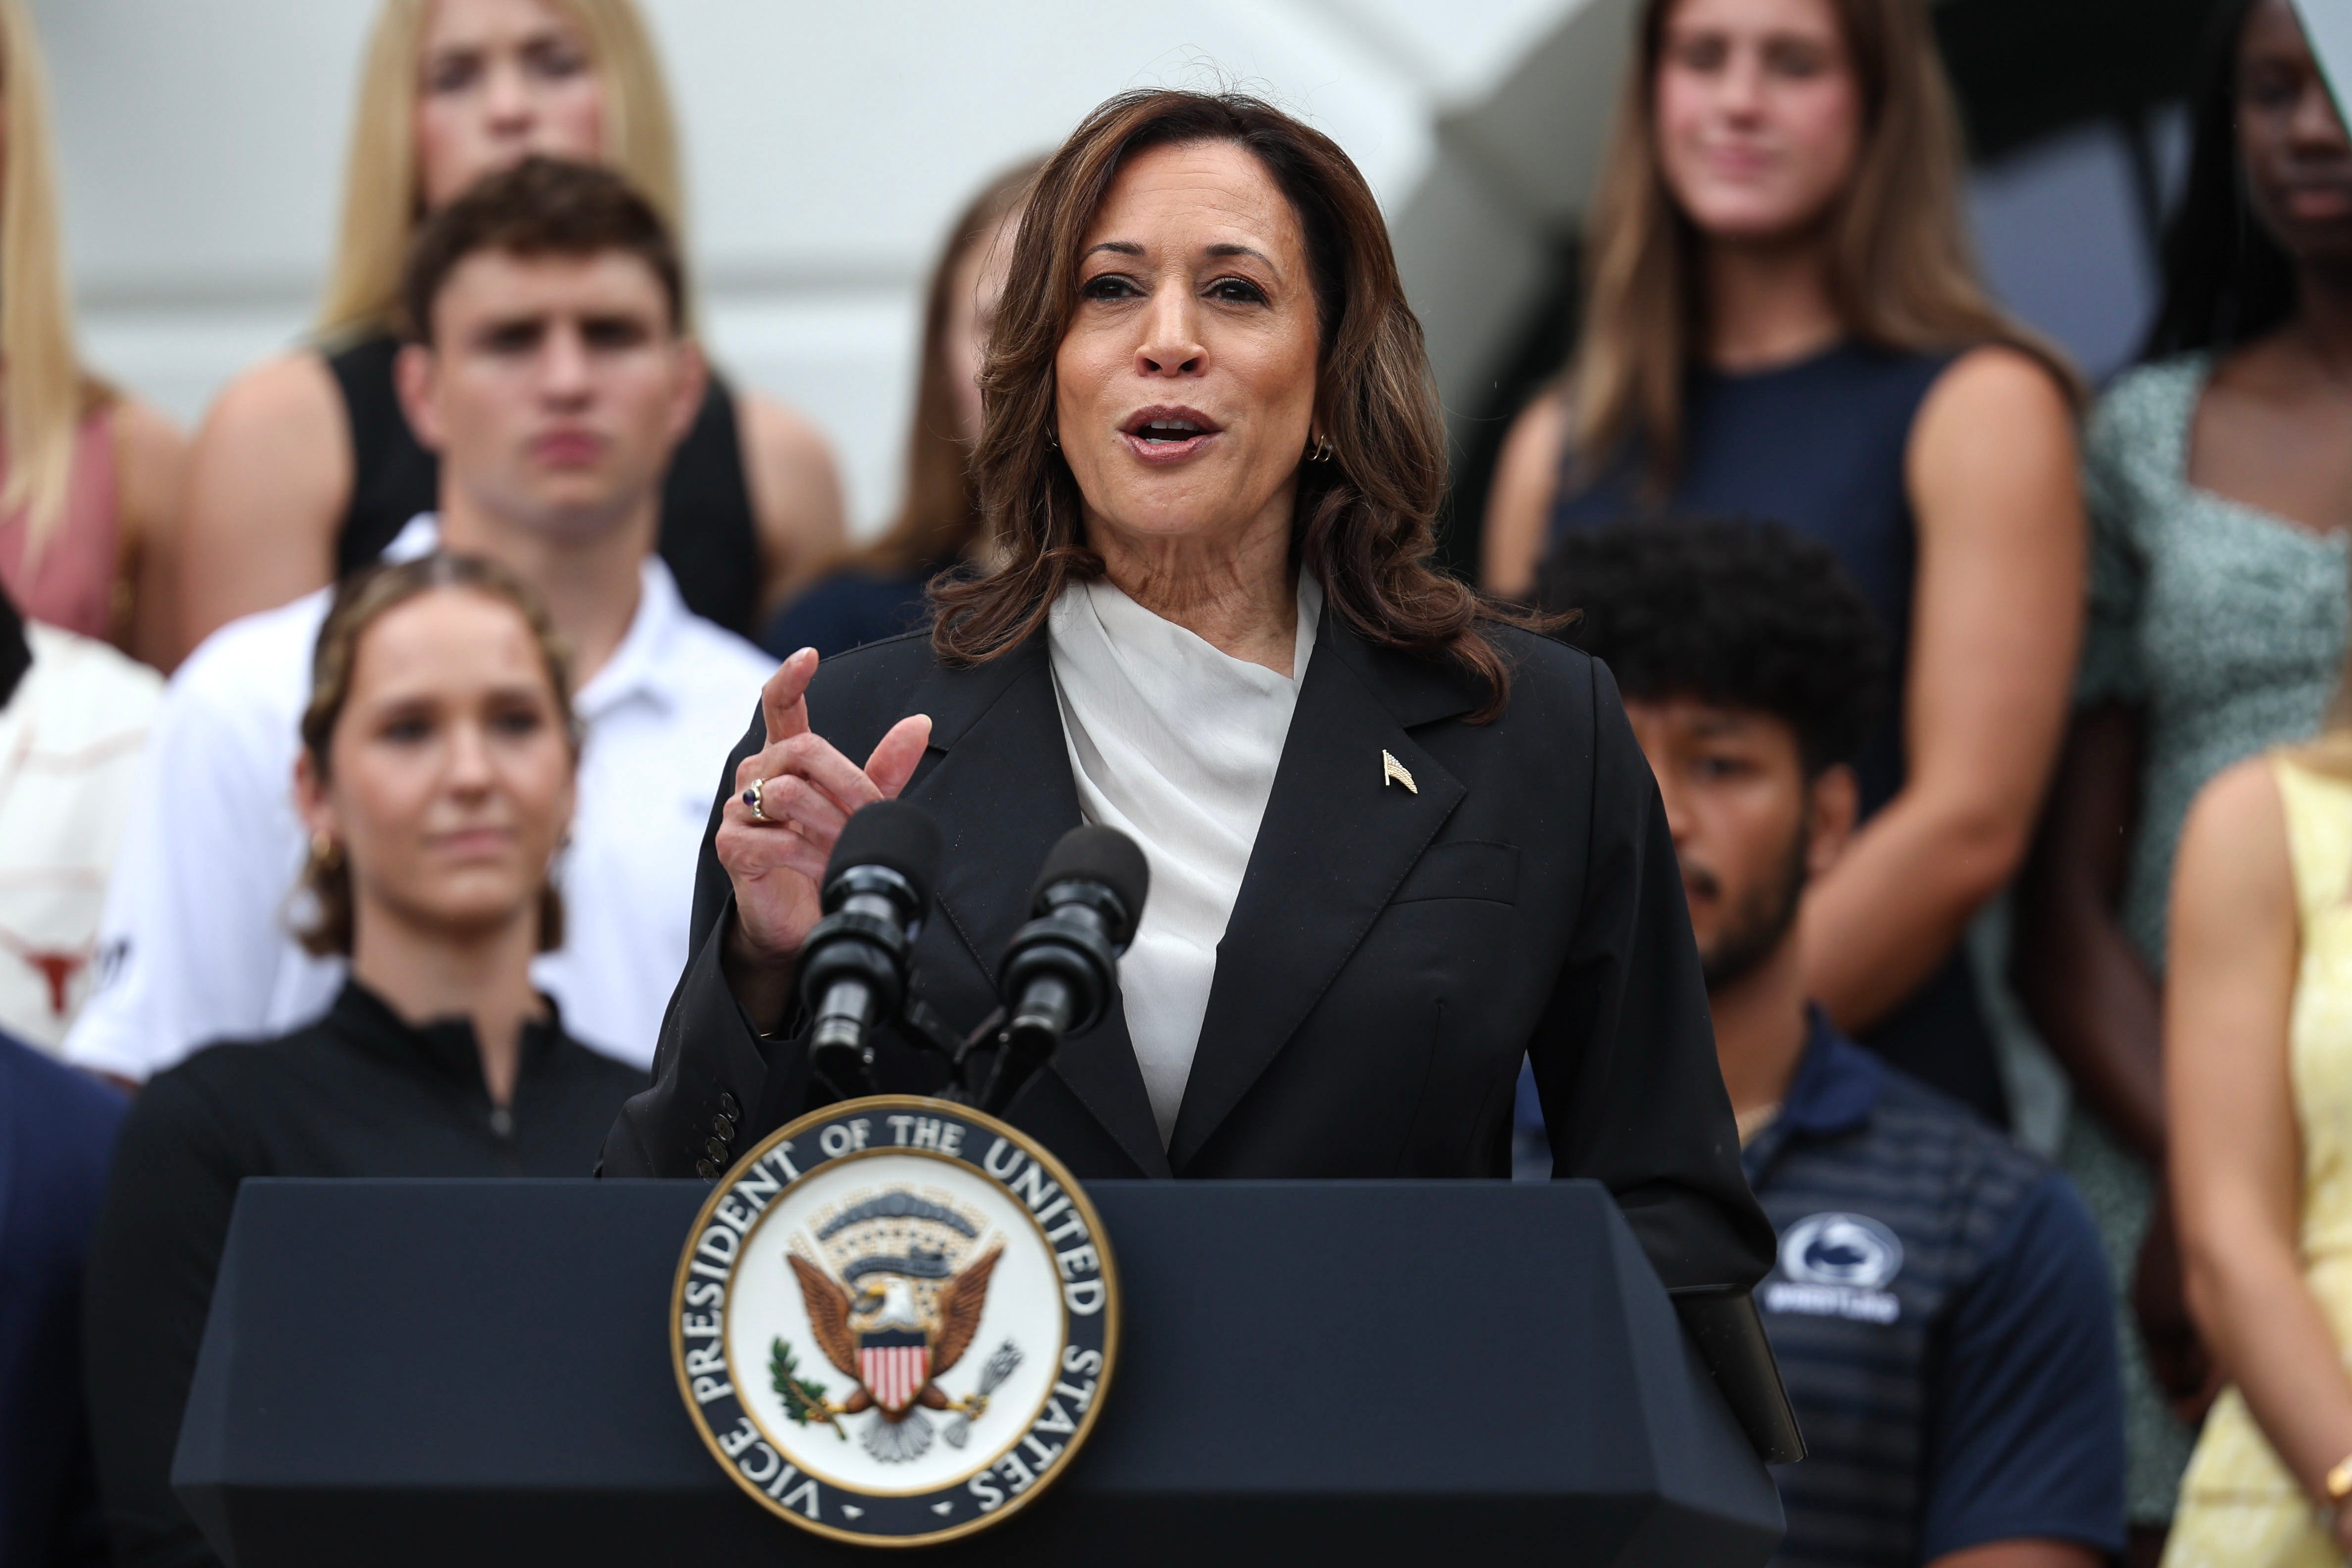 Kamala Harris speaks at the White House on July 22, a day after announcing her candidacy for the presidential election. Republican lawyers appear ready to slow Democrats' momentum by threatening her campaign coffers.